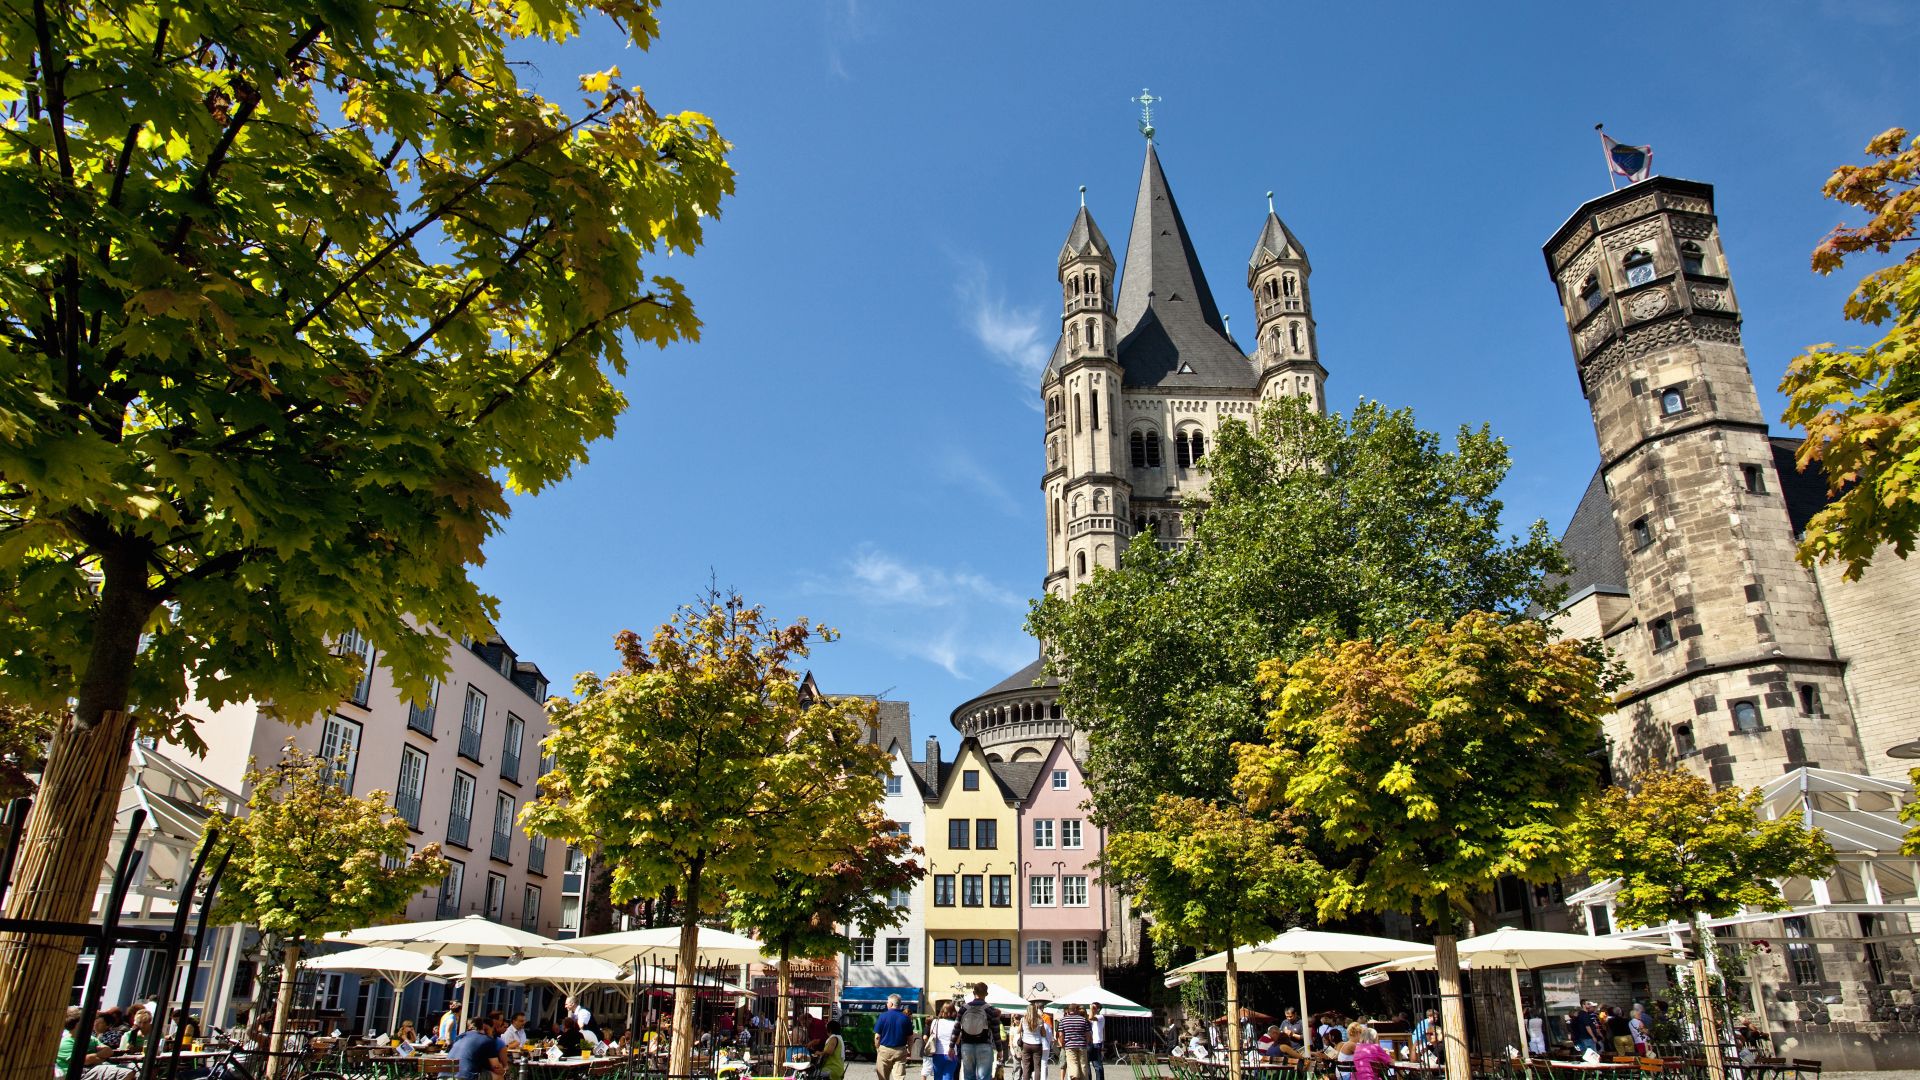 Cologne: Fish Market and Great St. Martin's Church in the Old Town